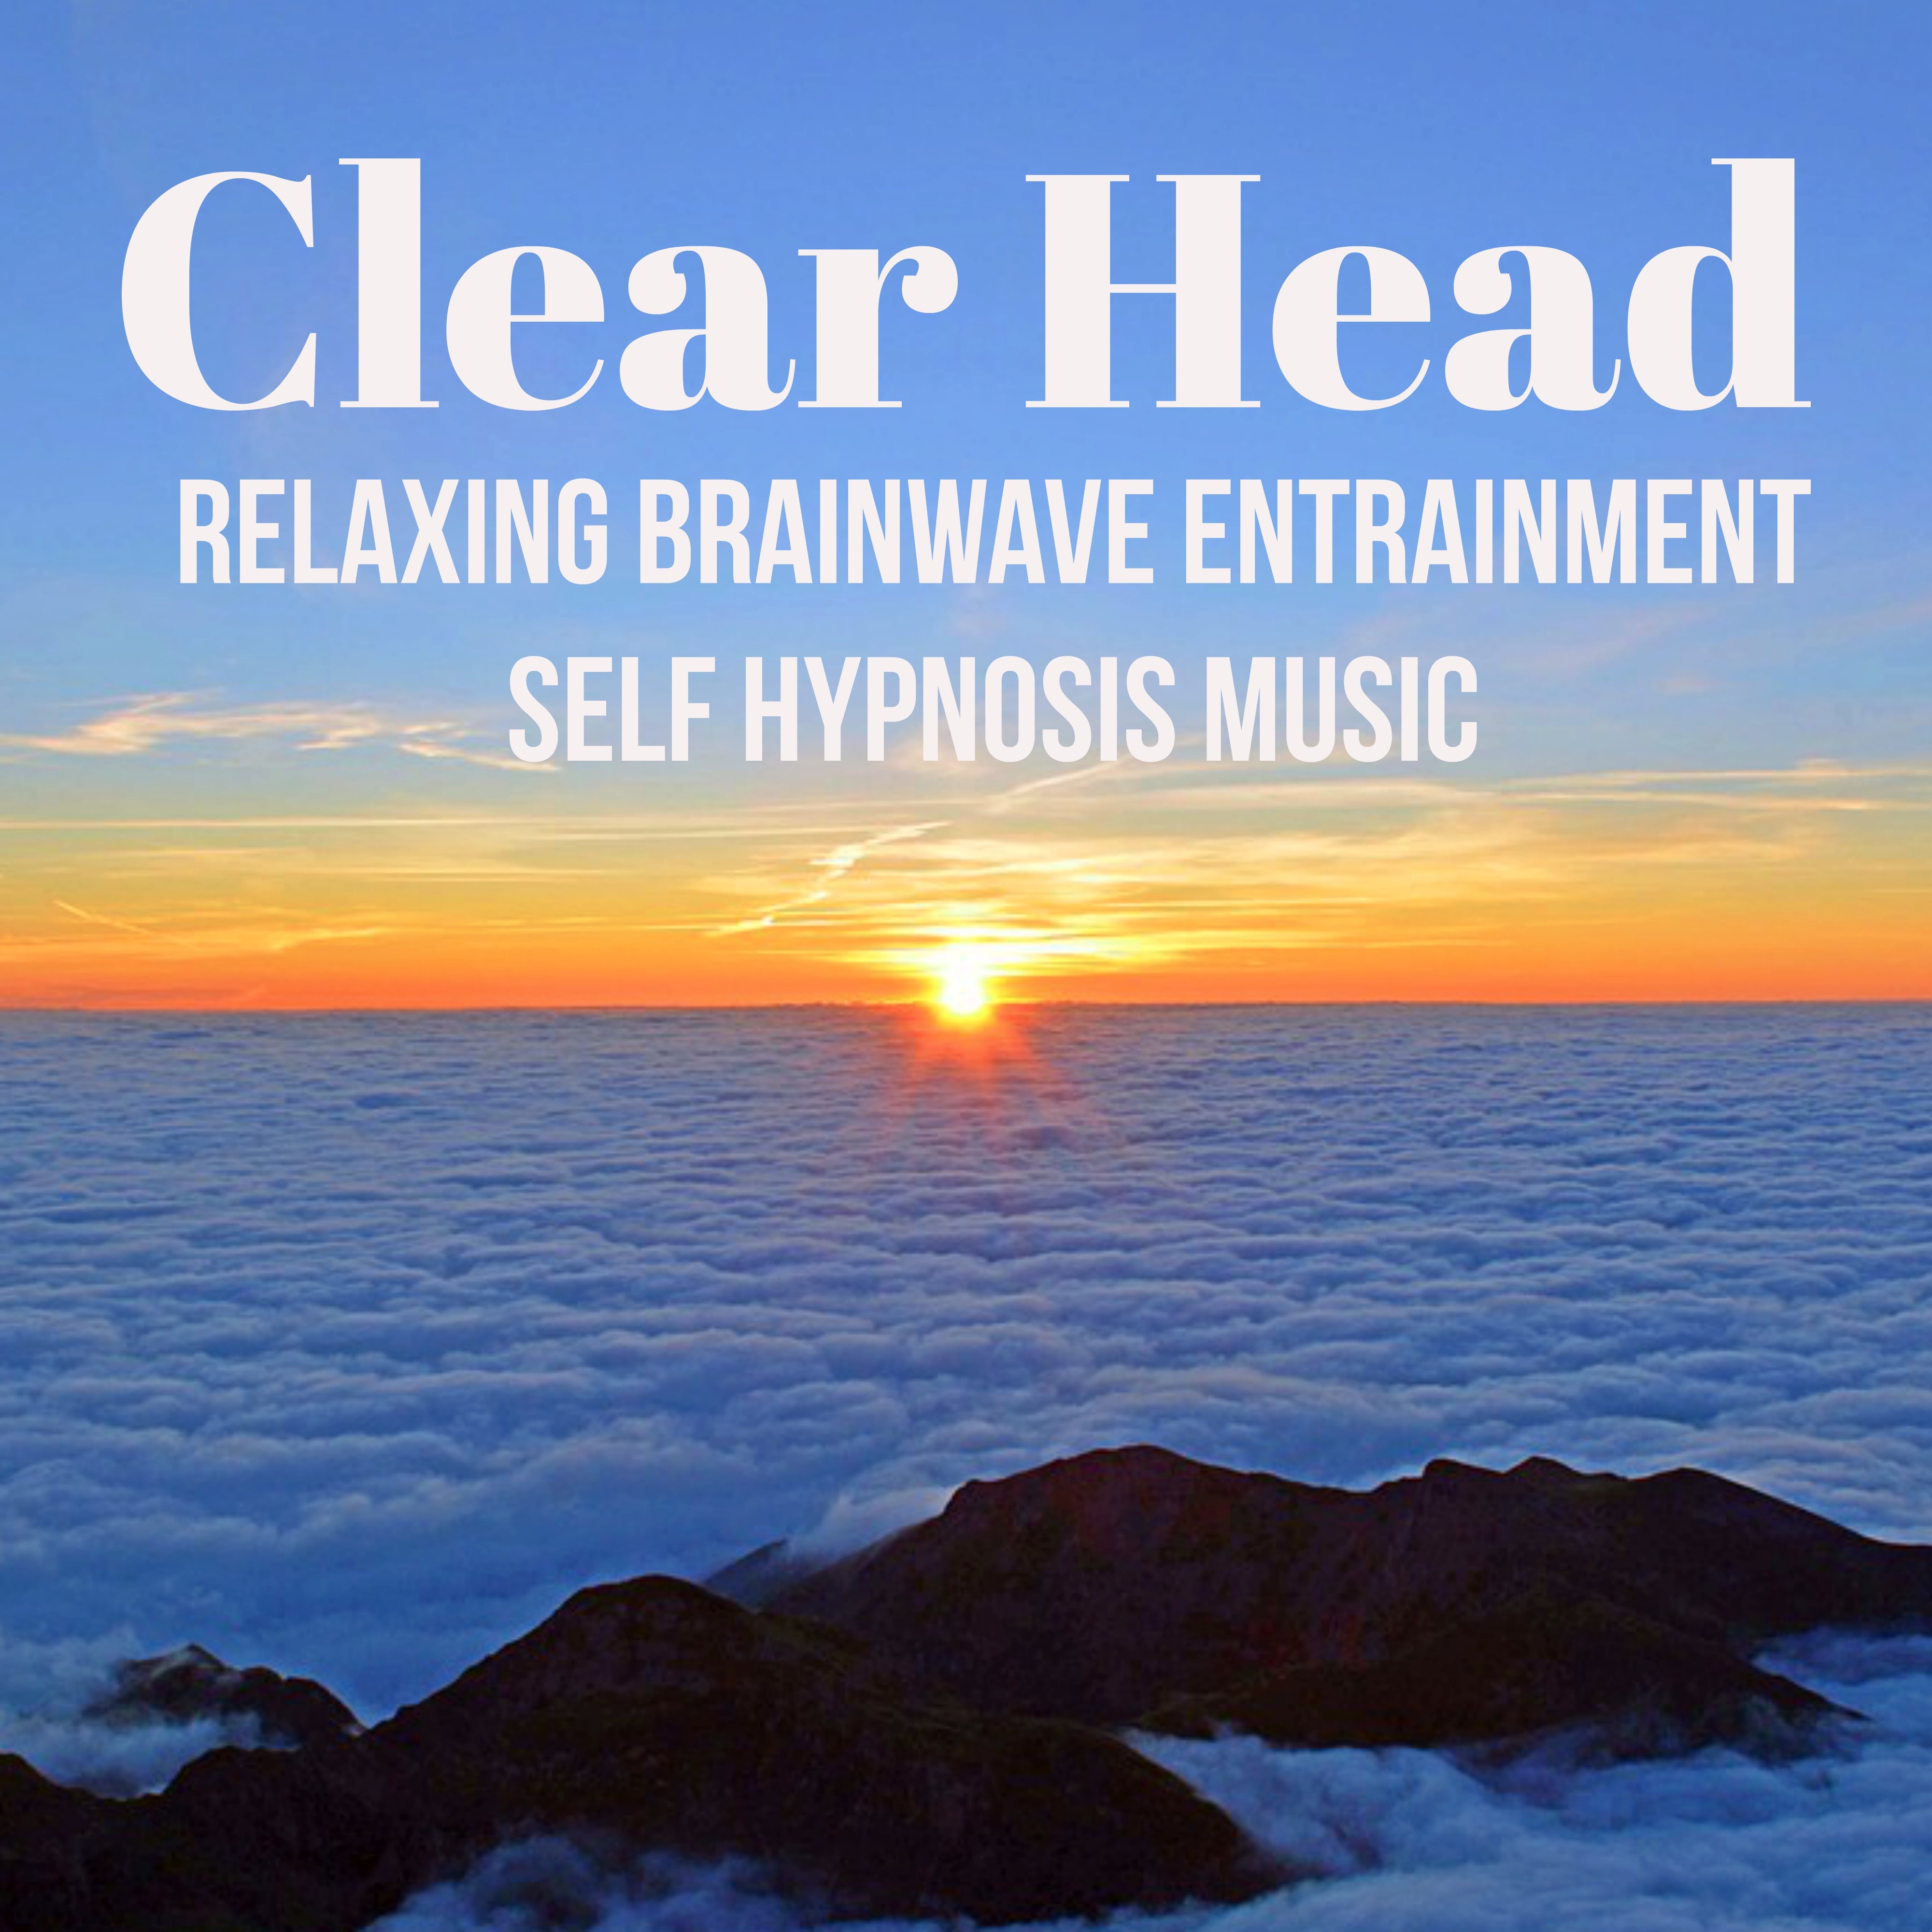 Clear Head - Relaxing Brainwave Entrainment Self Hypnosis Music for Stay Calm Inner Peace Health Body with Nature Instrumental Binaural Sounds